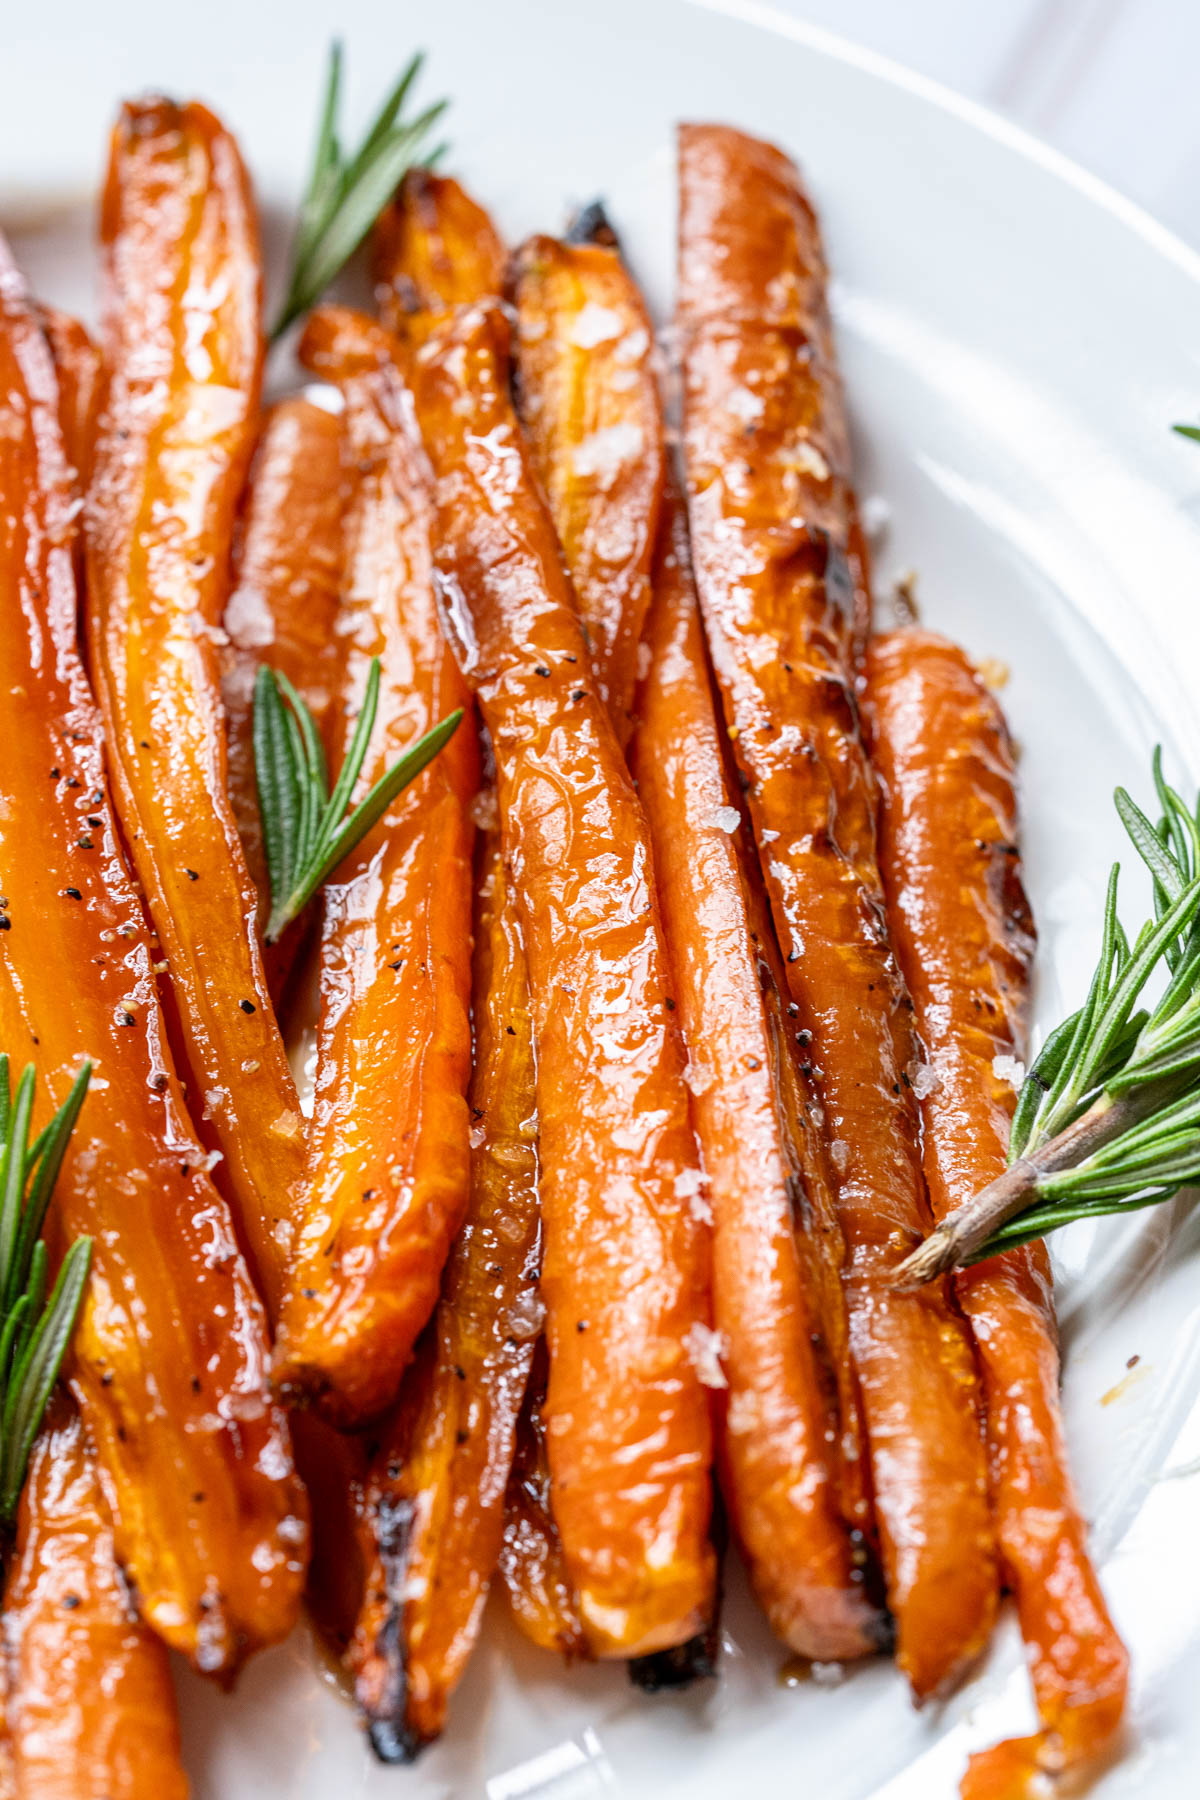 Roasted carrots on a white plate with rosemary sprigs.